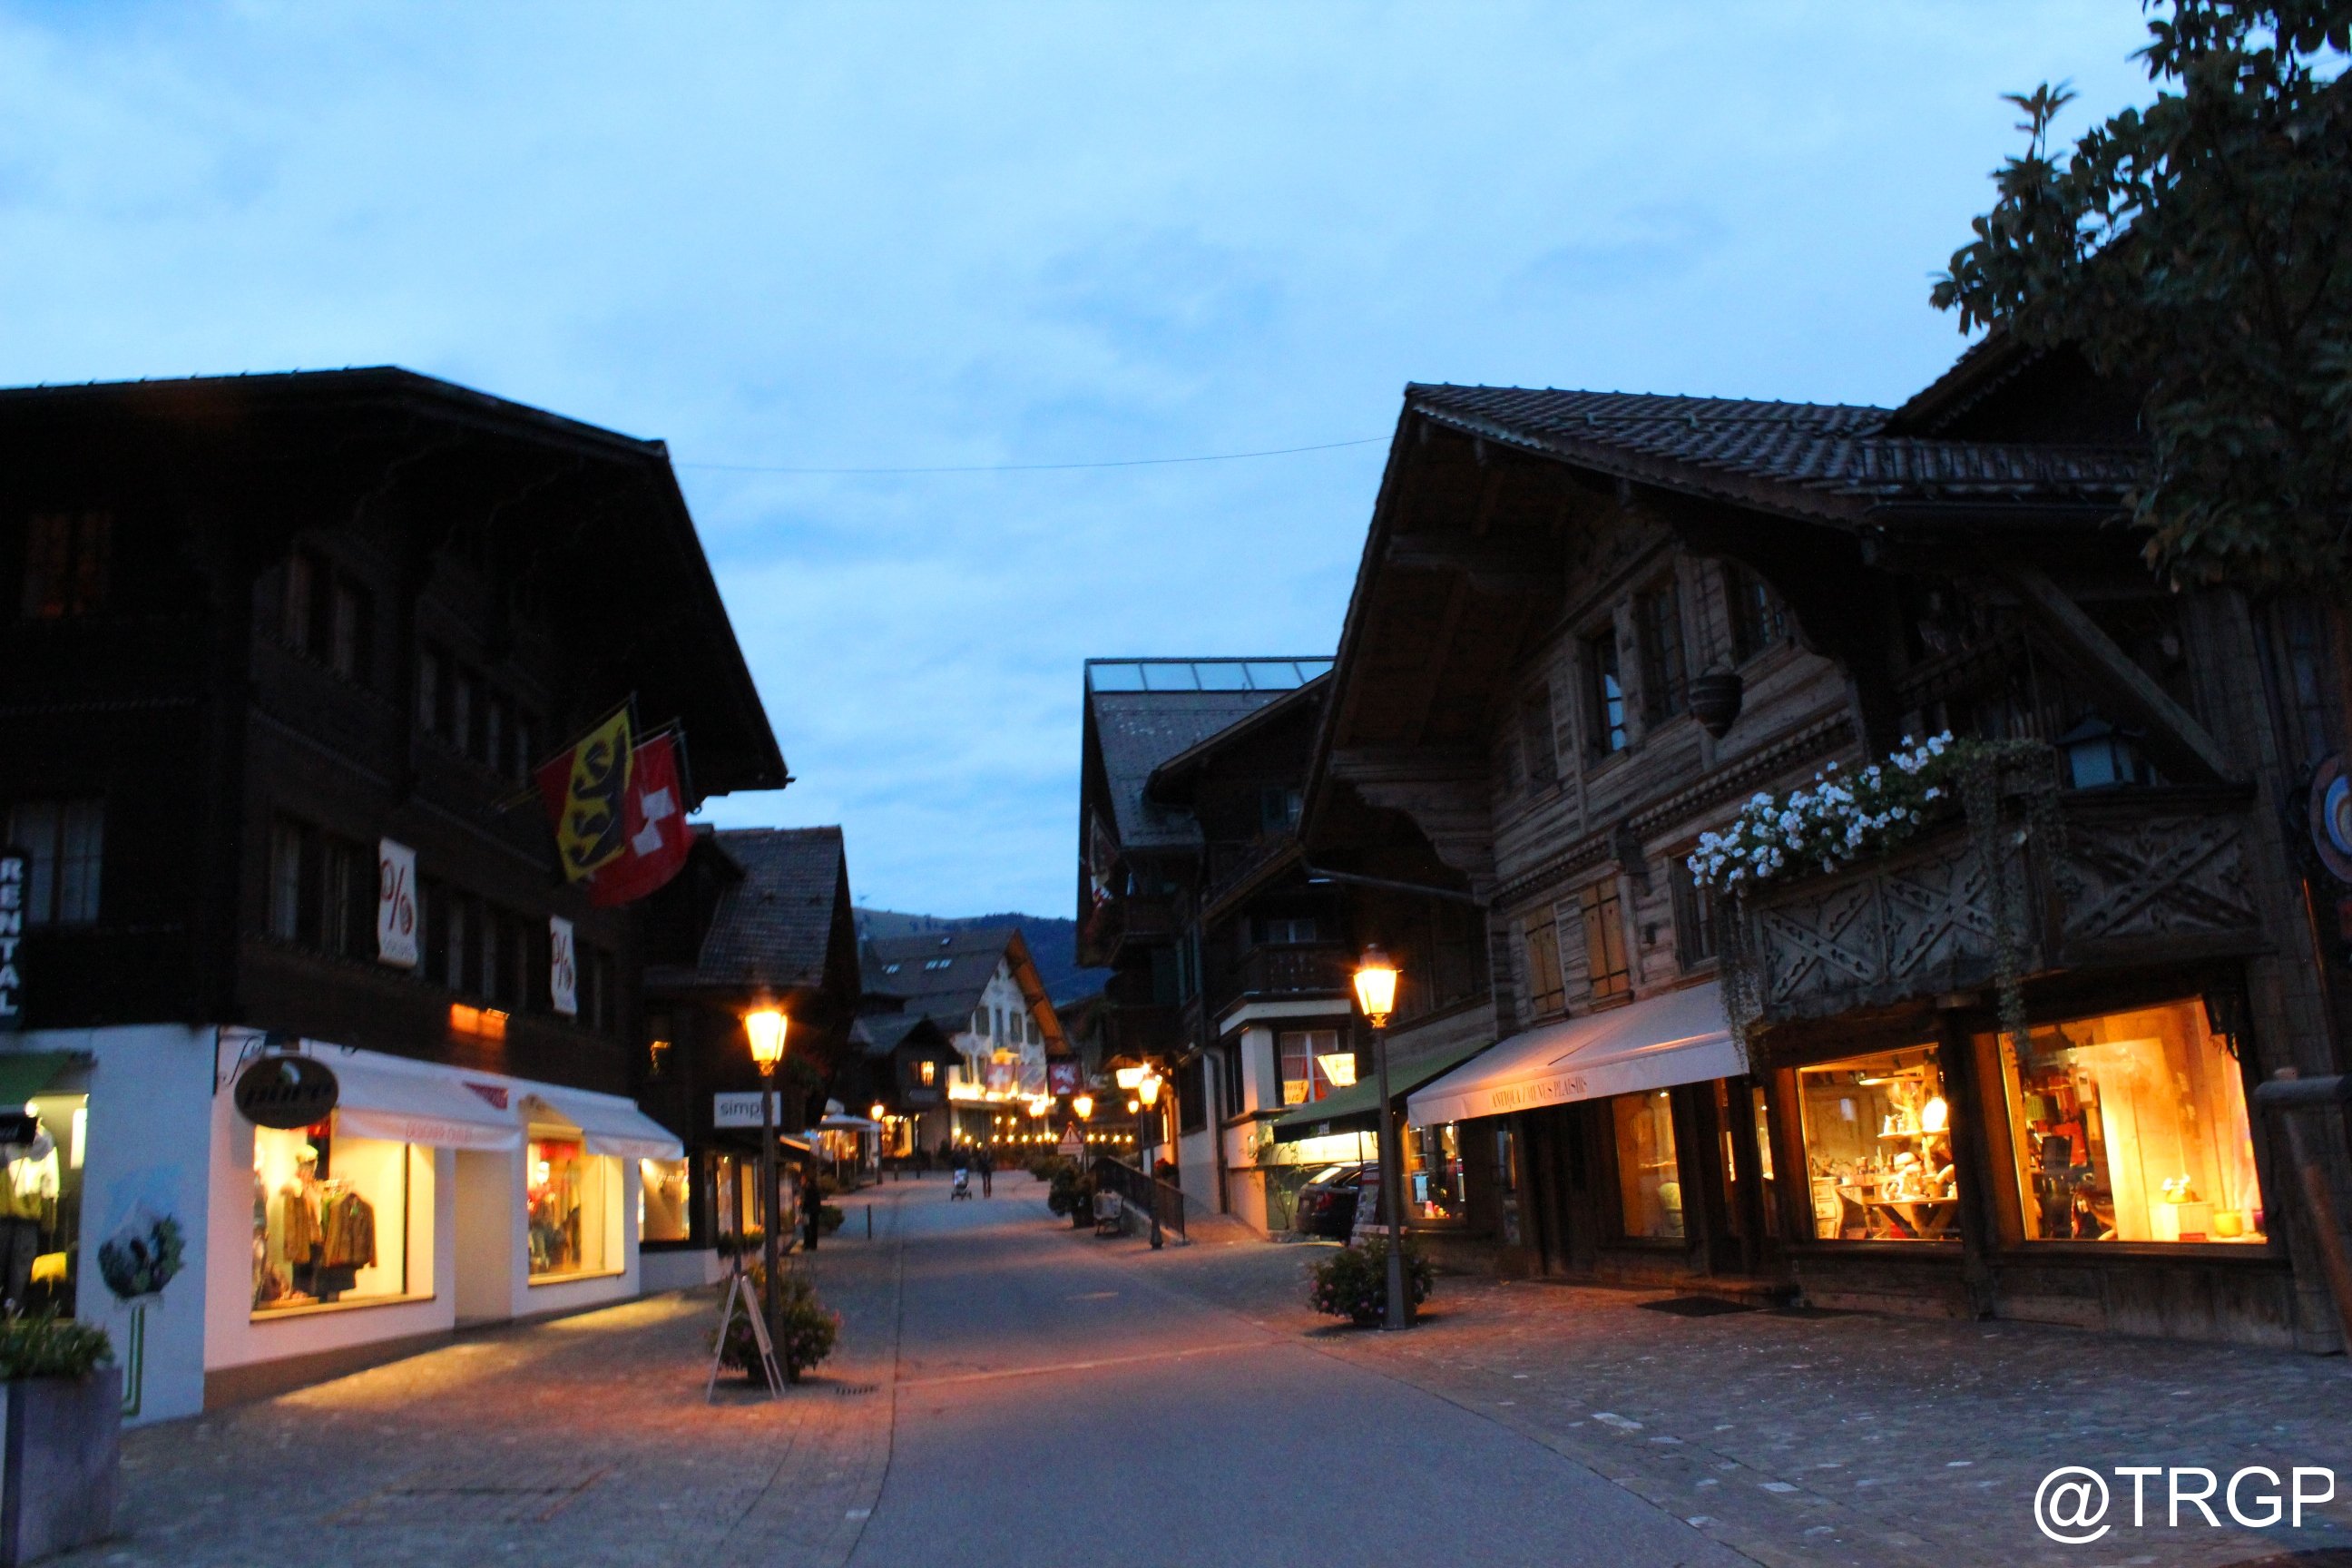 Gstaad